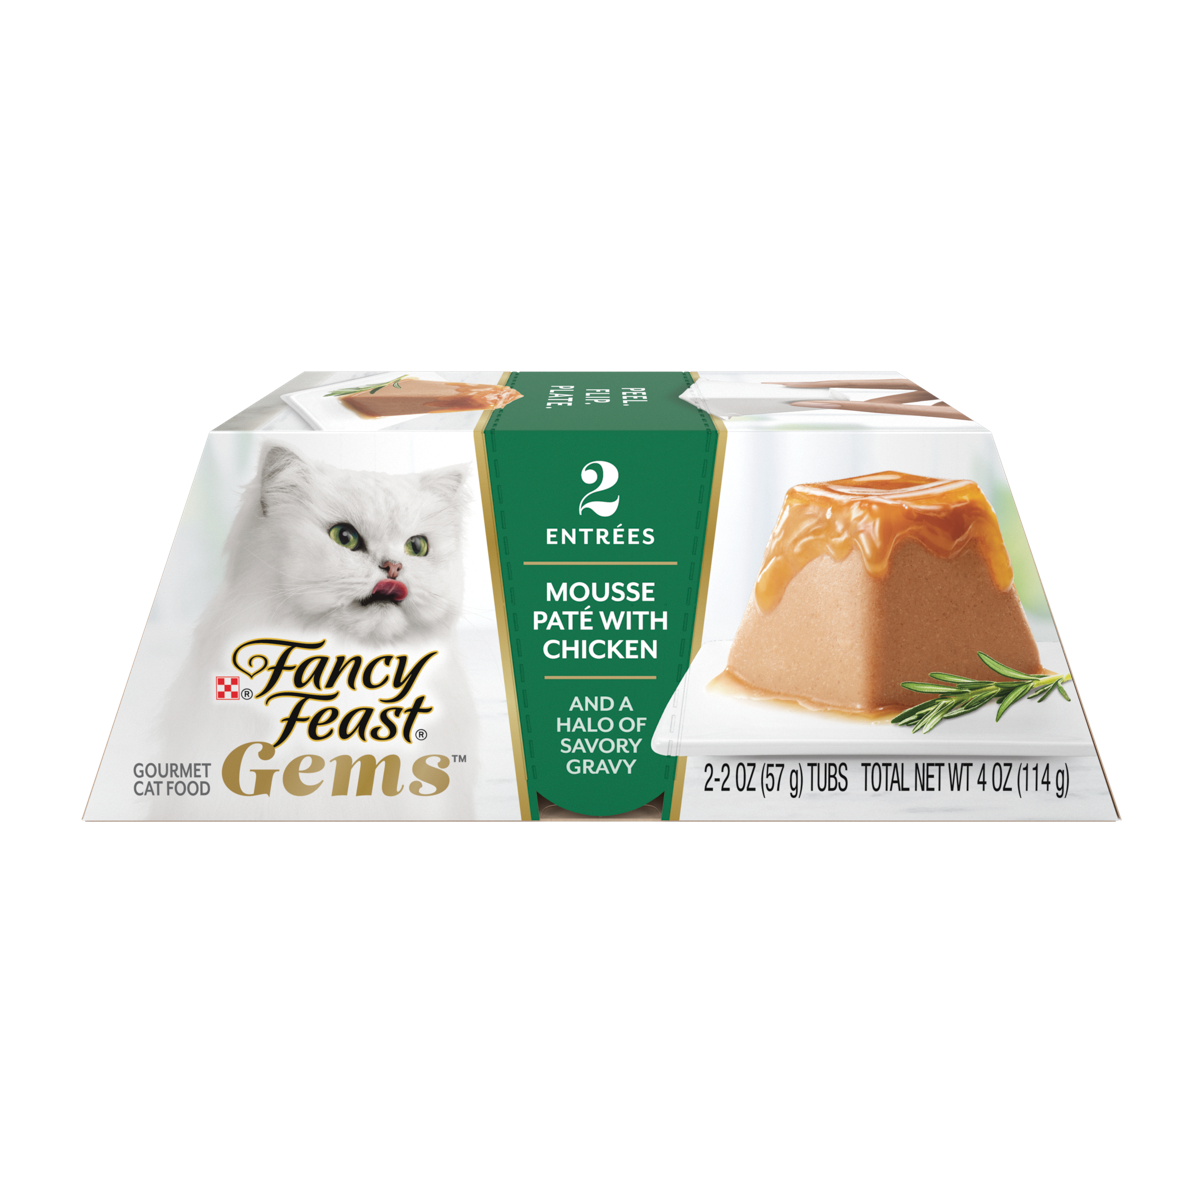 Dual pack of Gems Mousse Pate with chicken